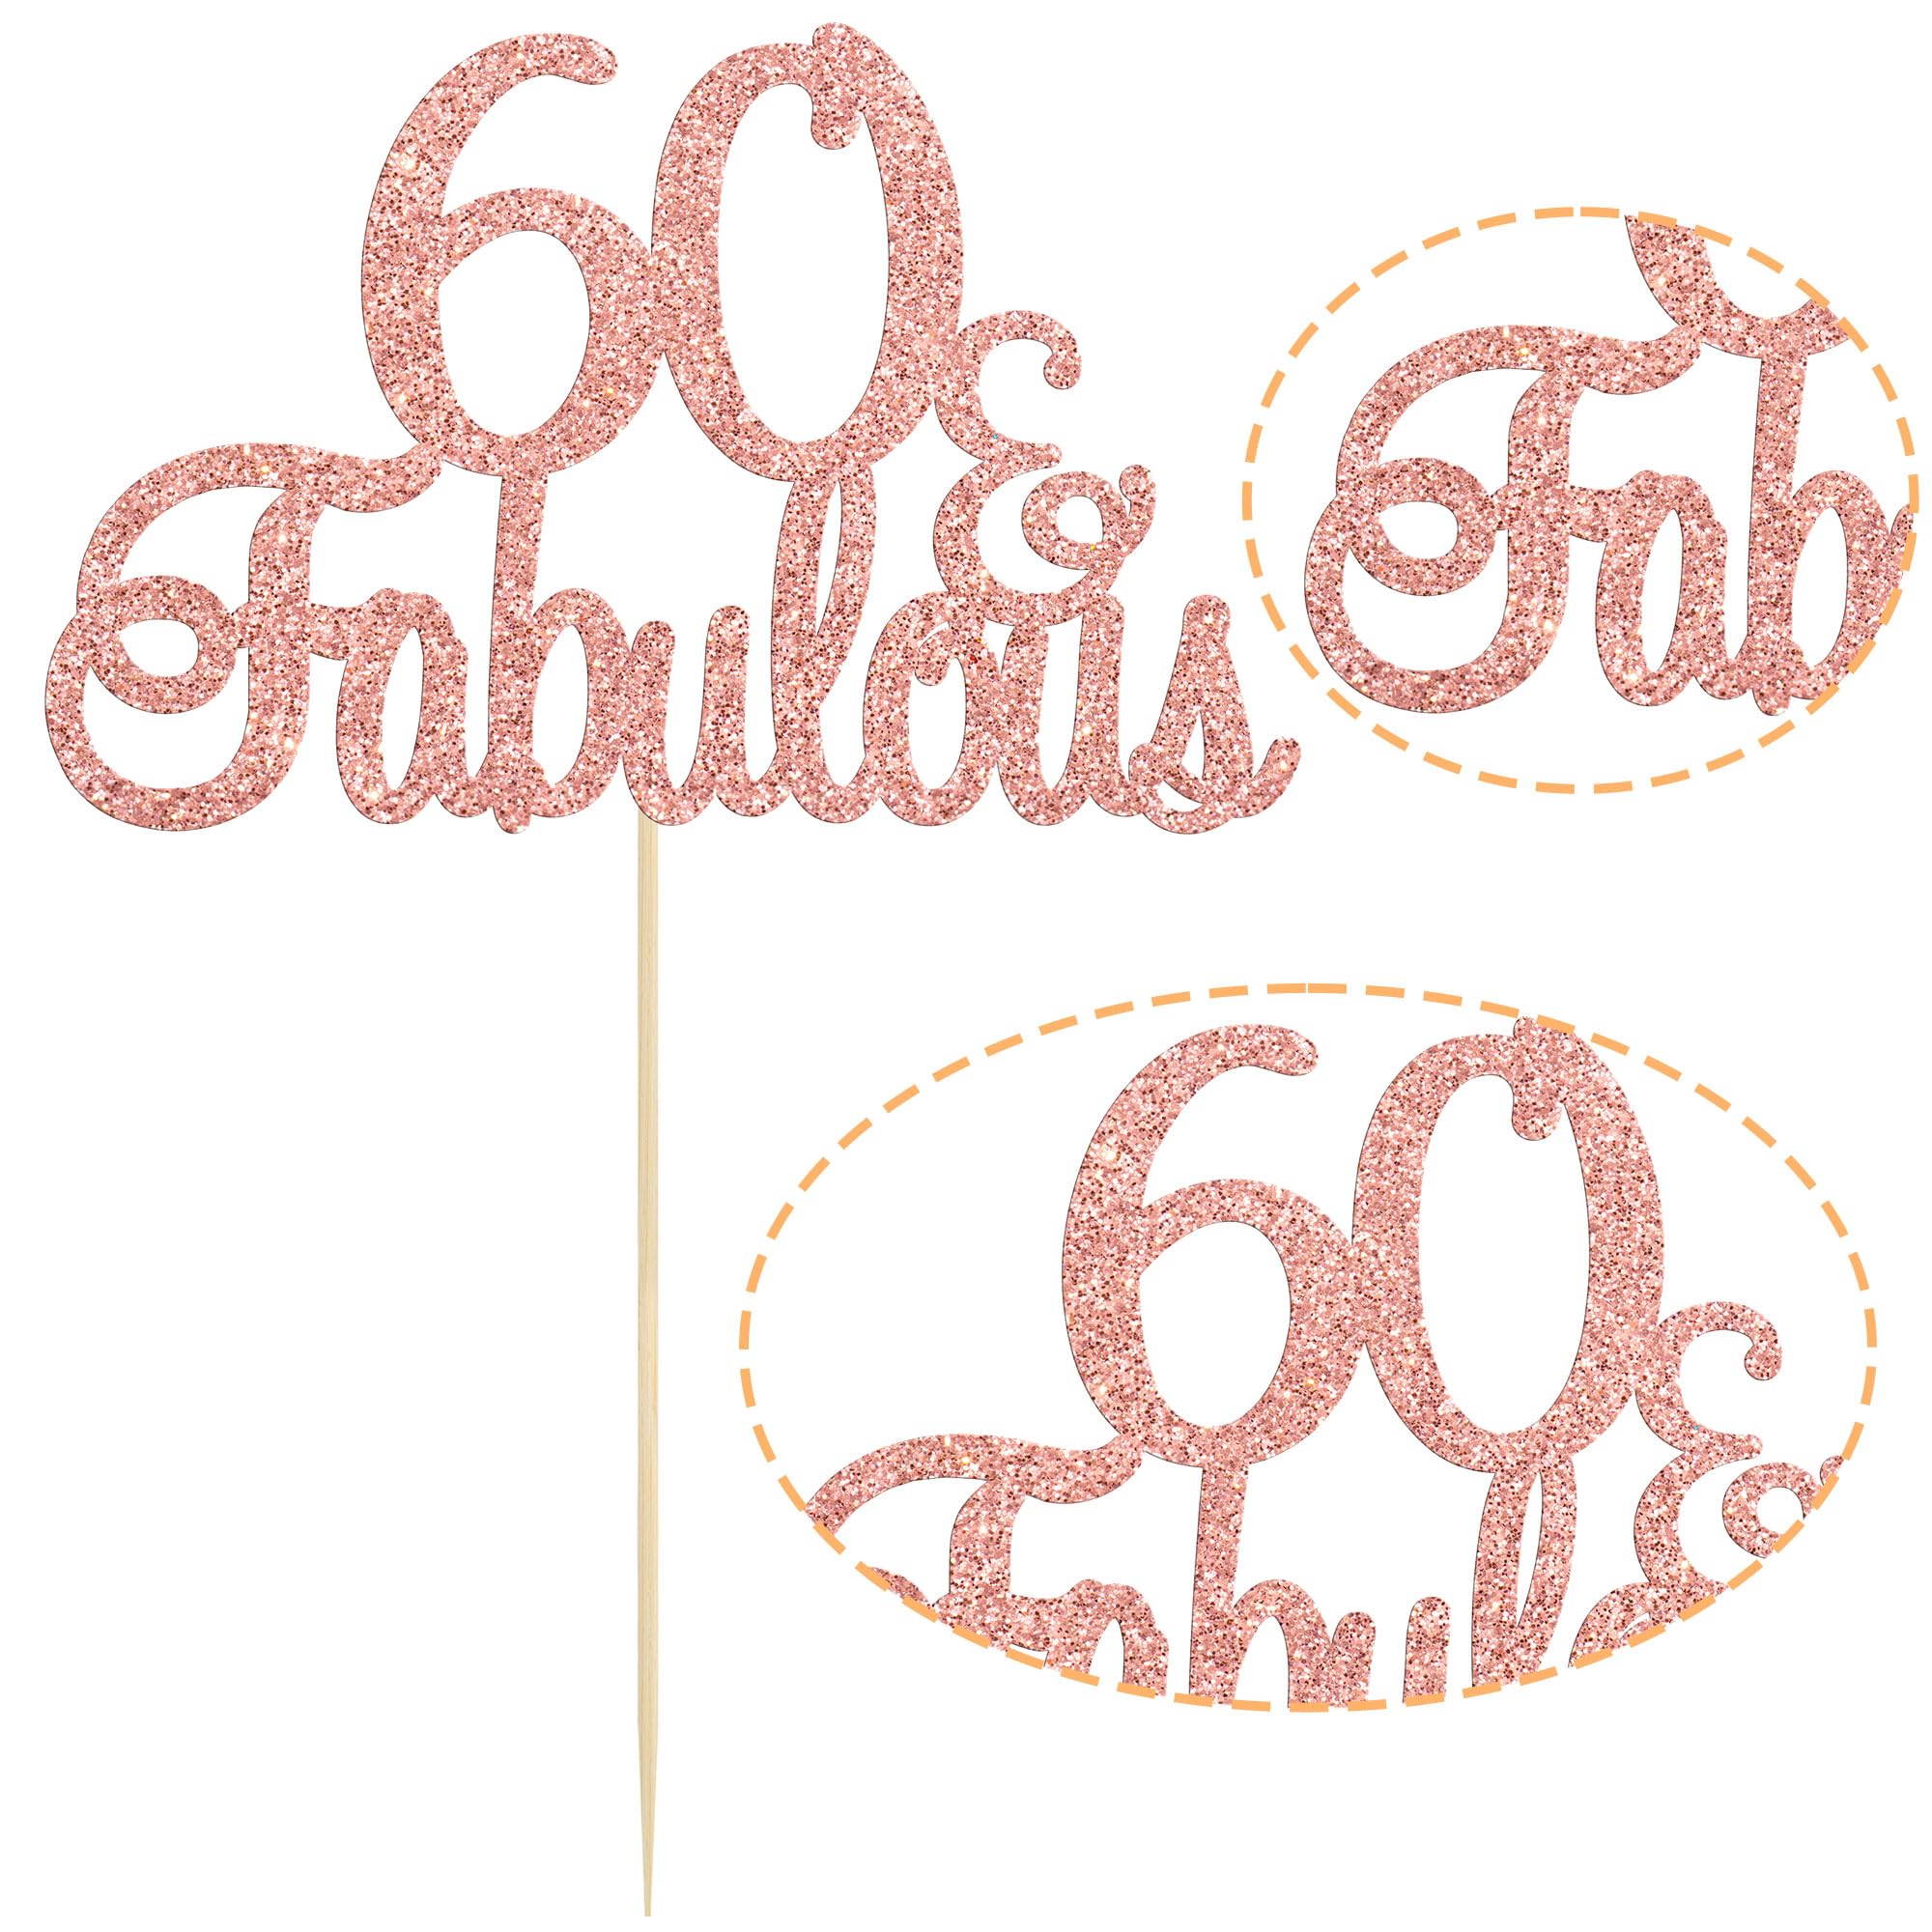 Gyufise Rose Gold Glittery 60 & Fabulous Birthday Cake Topper for 60th Birthday Party Decorations 60 Birthday Cake Decorations Supplies 1 Pack